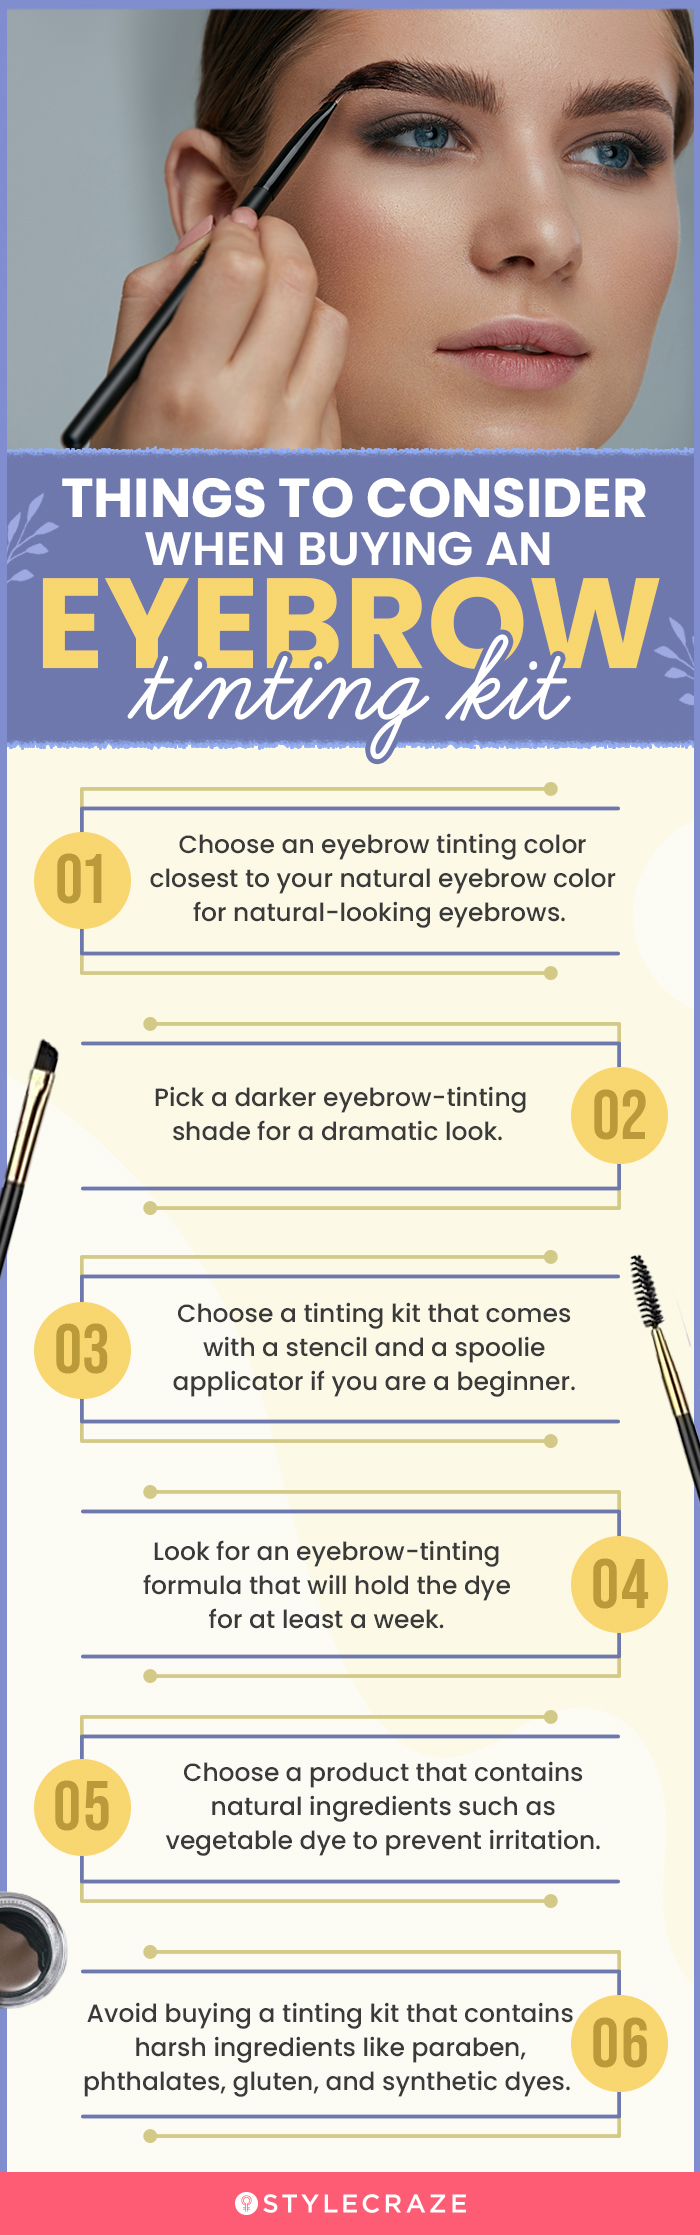 Things To Consider When Buying An Eyebrow Tinting Kit (infographic)